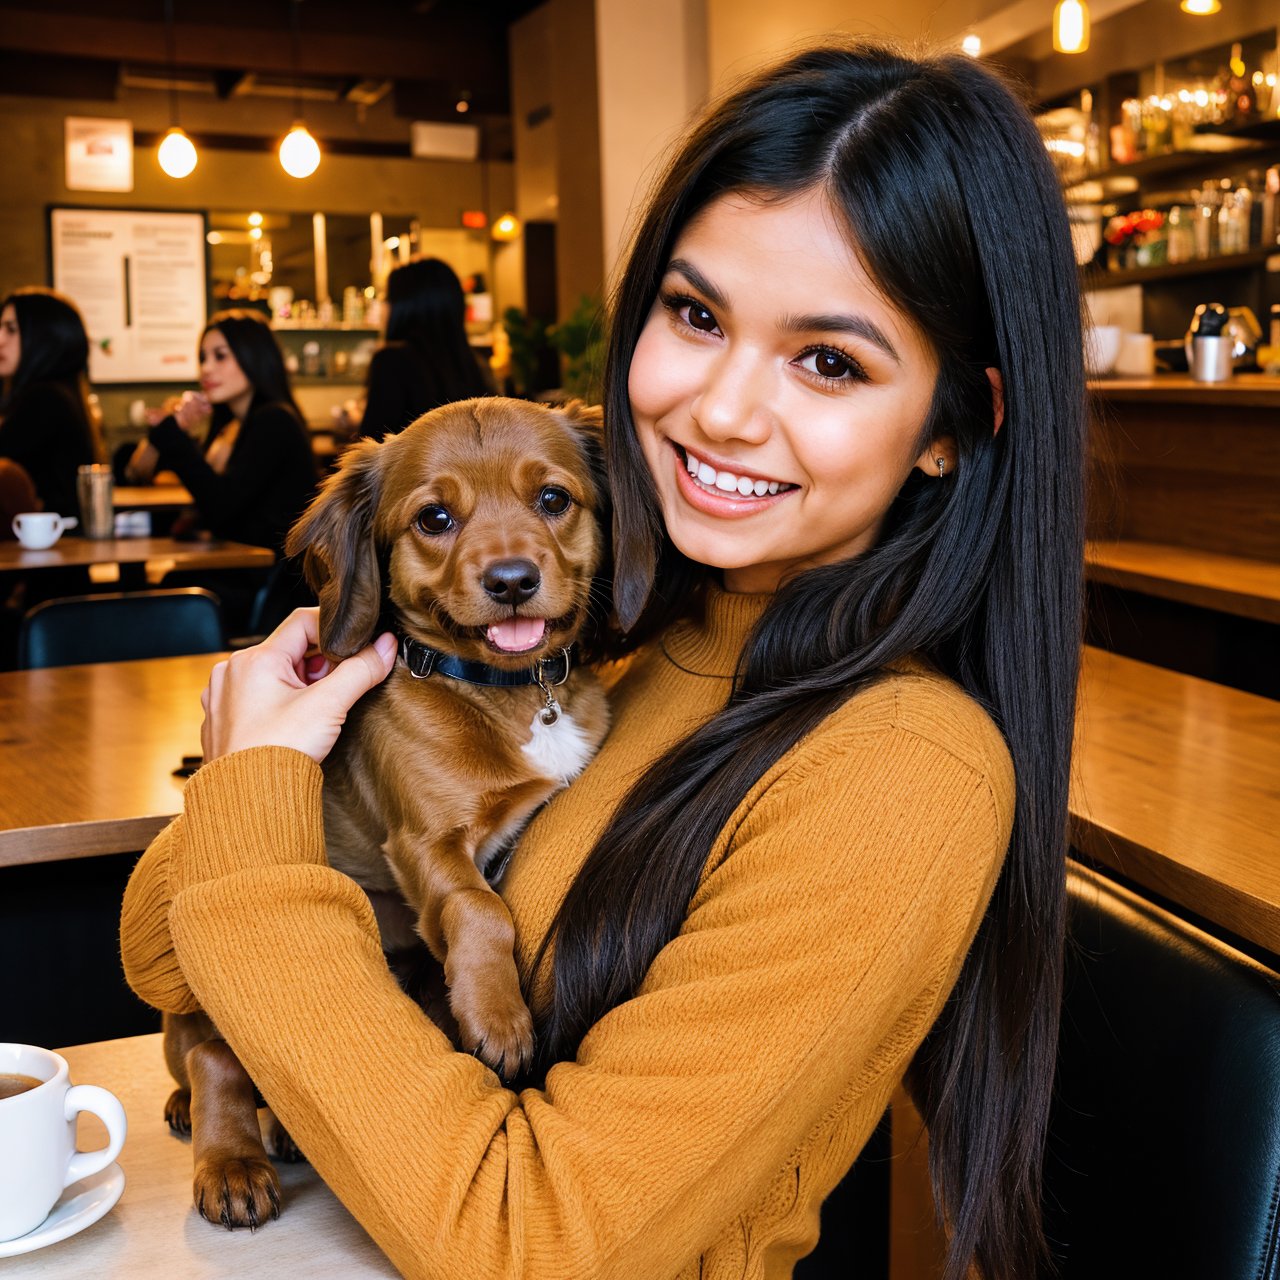 Cute black long straight hair brown eyes round face girl wearing brown sweater sitting in café drinking coffee, sunset, toothy smile without bangs, holding a poodle puppy in her arms